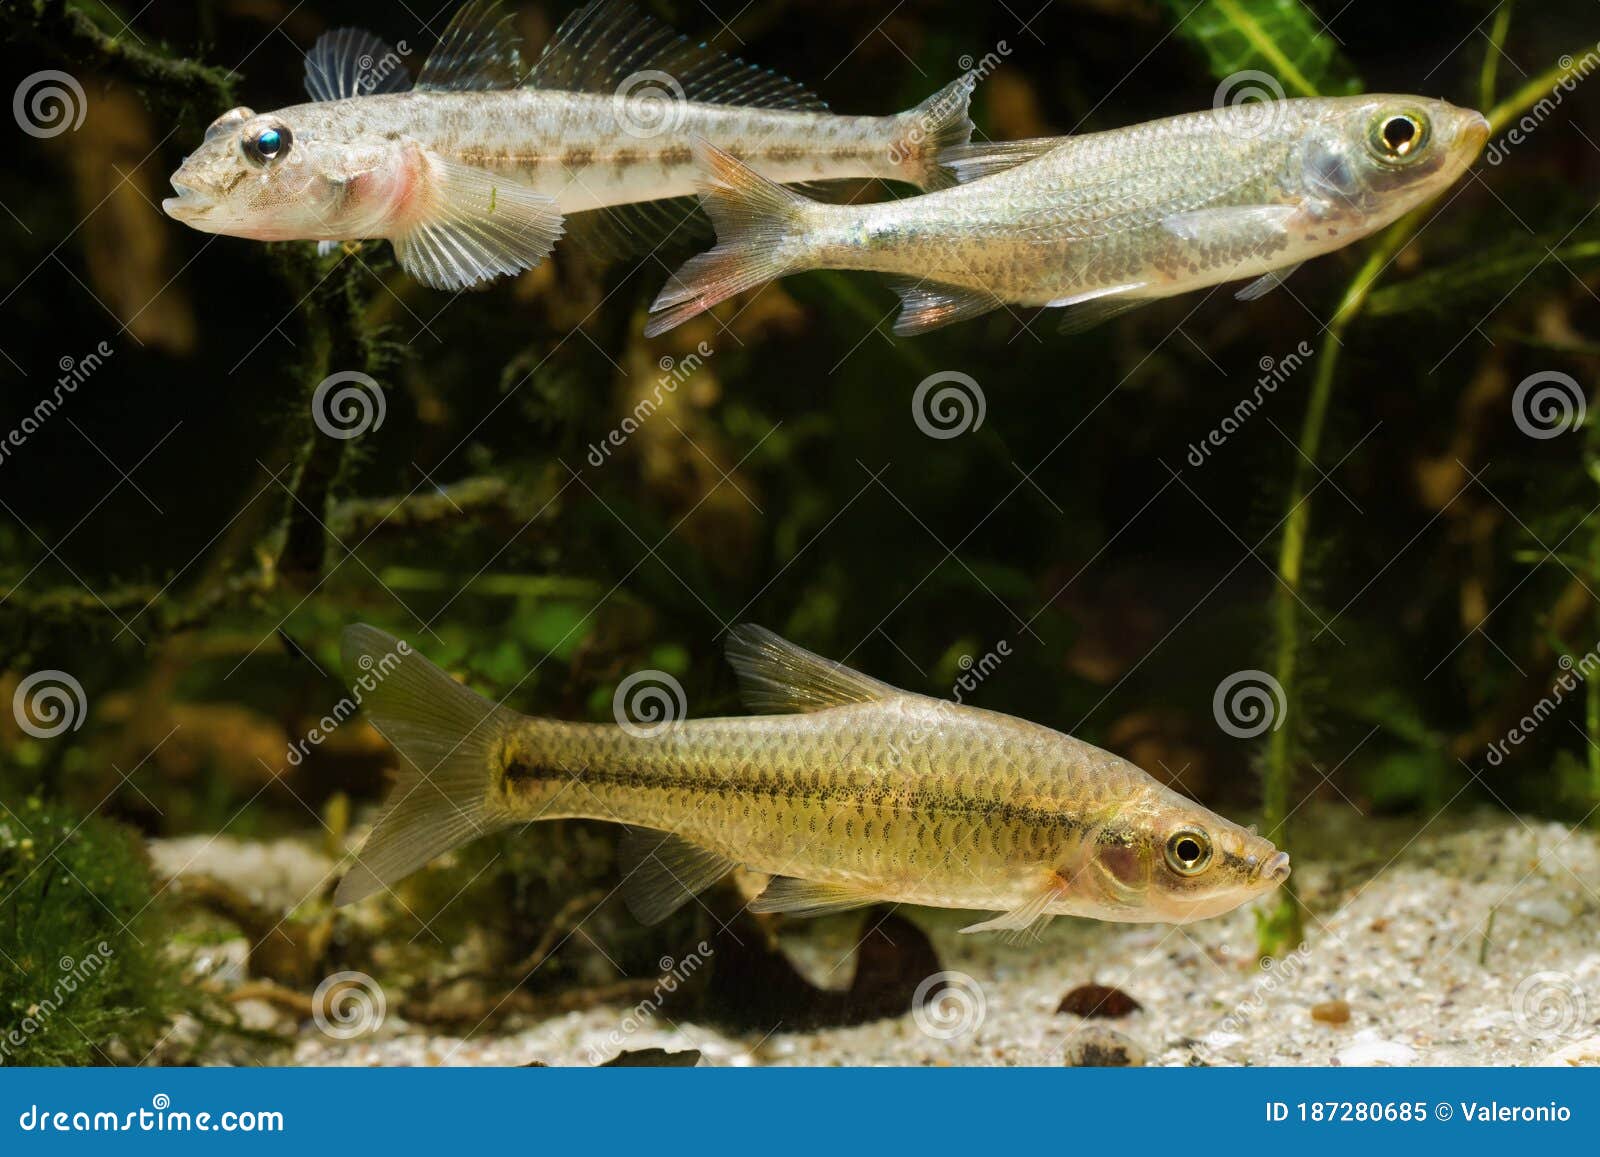 stone moroko or topmouth gudgeon, monkey goby and juvenile common rudd, omnivore freshwater fishes in biotope aquarium